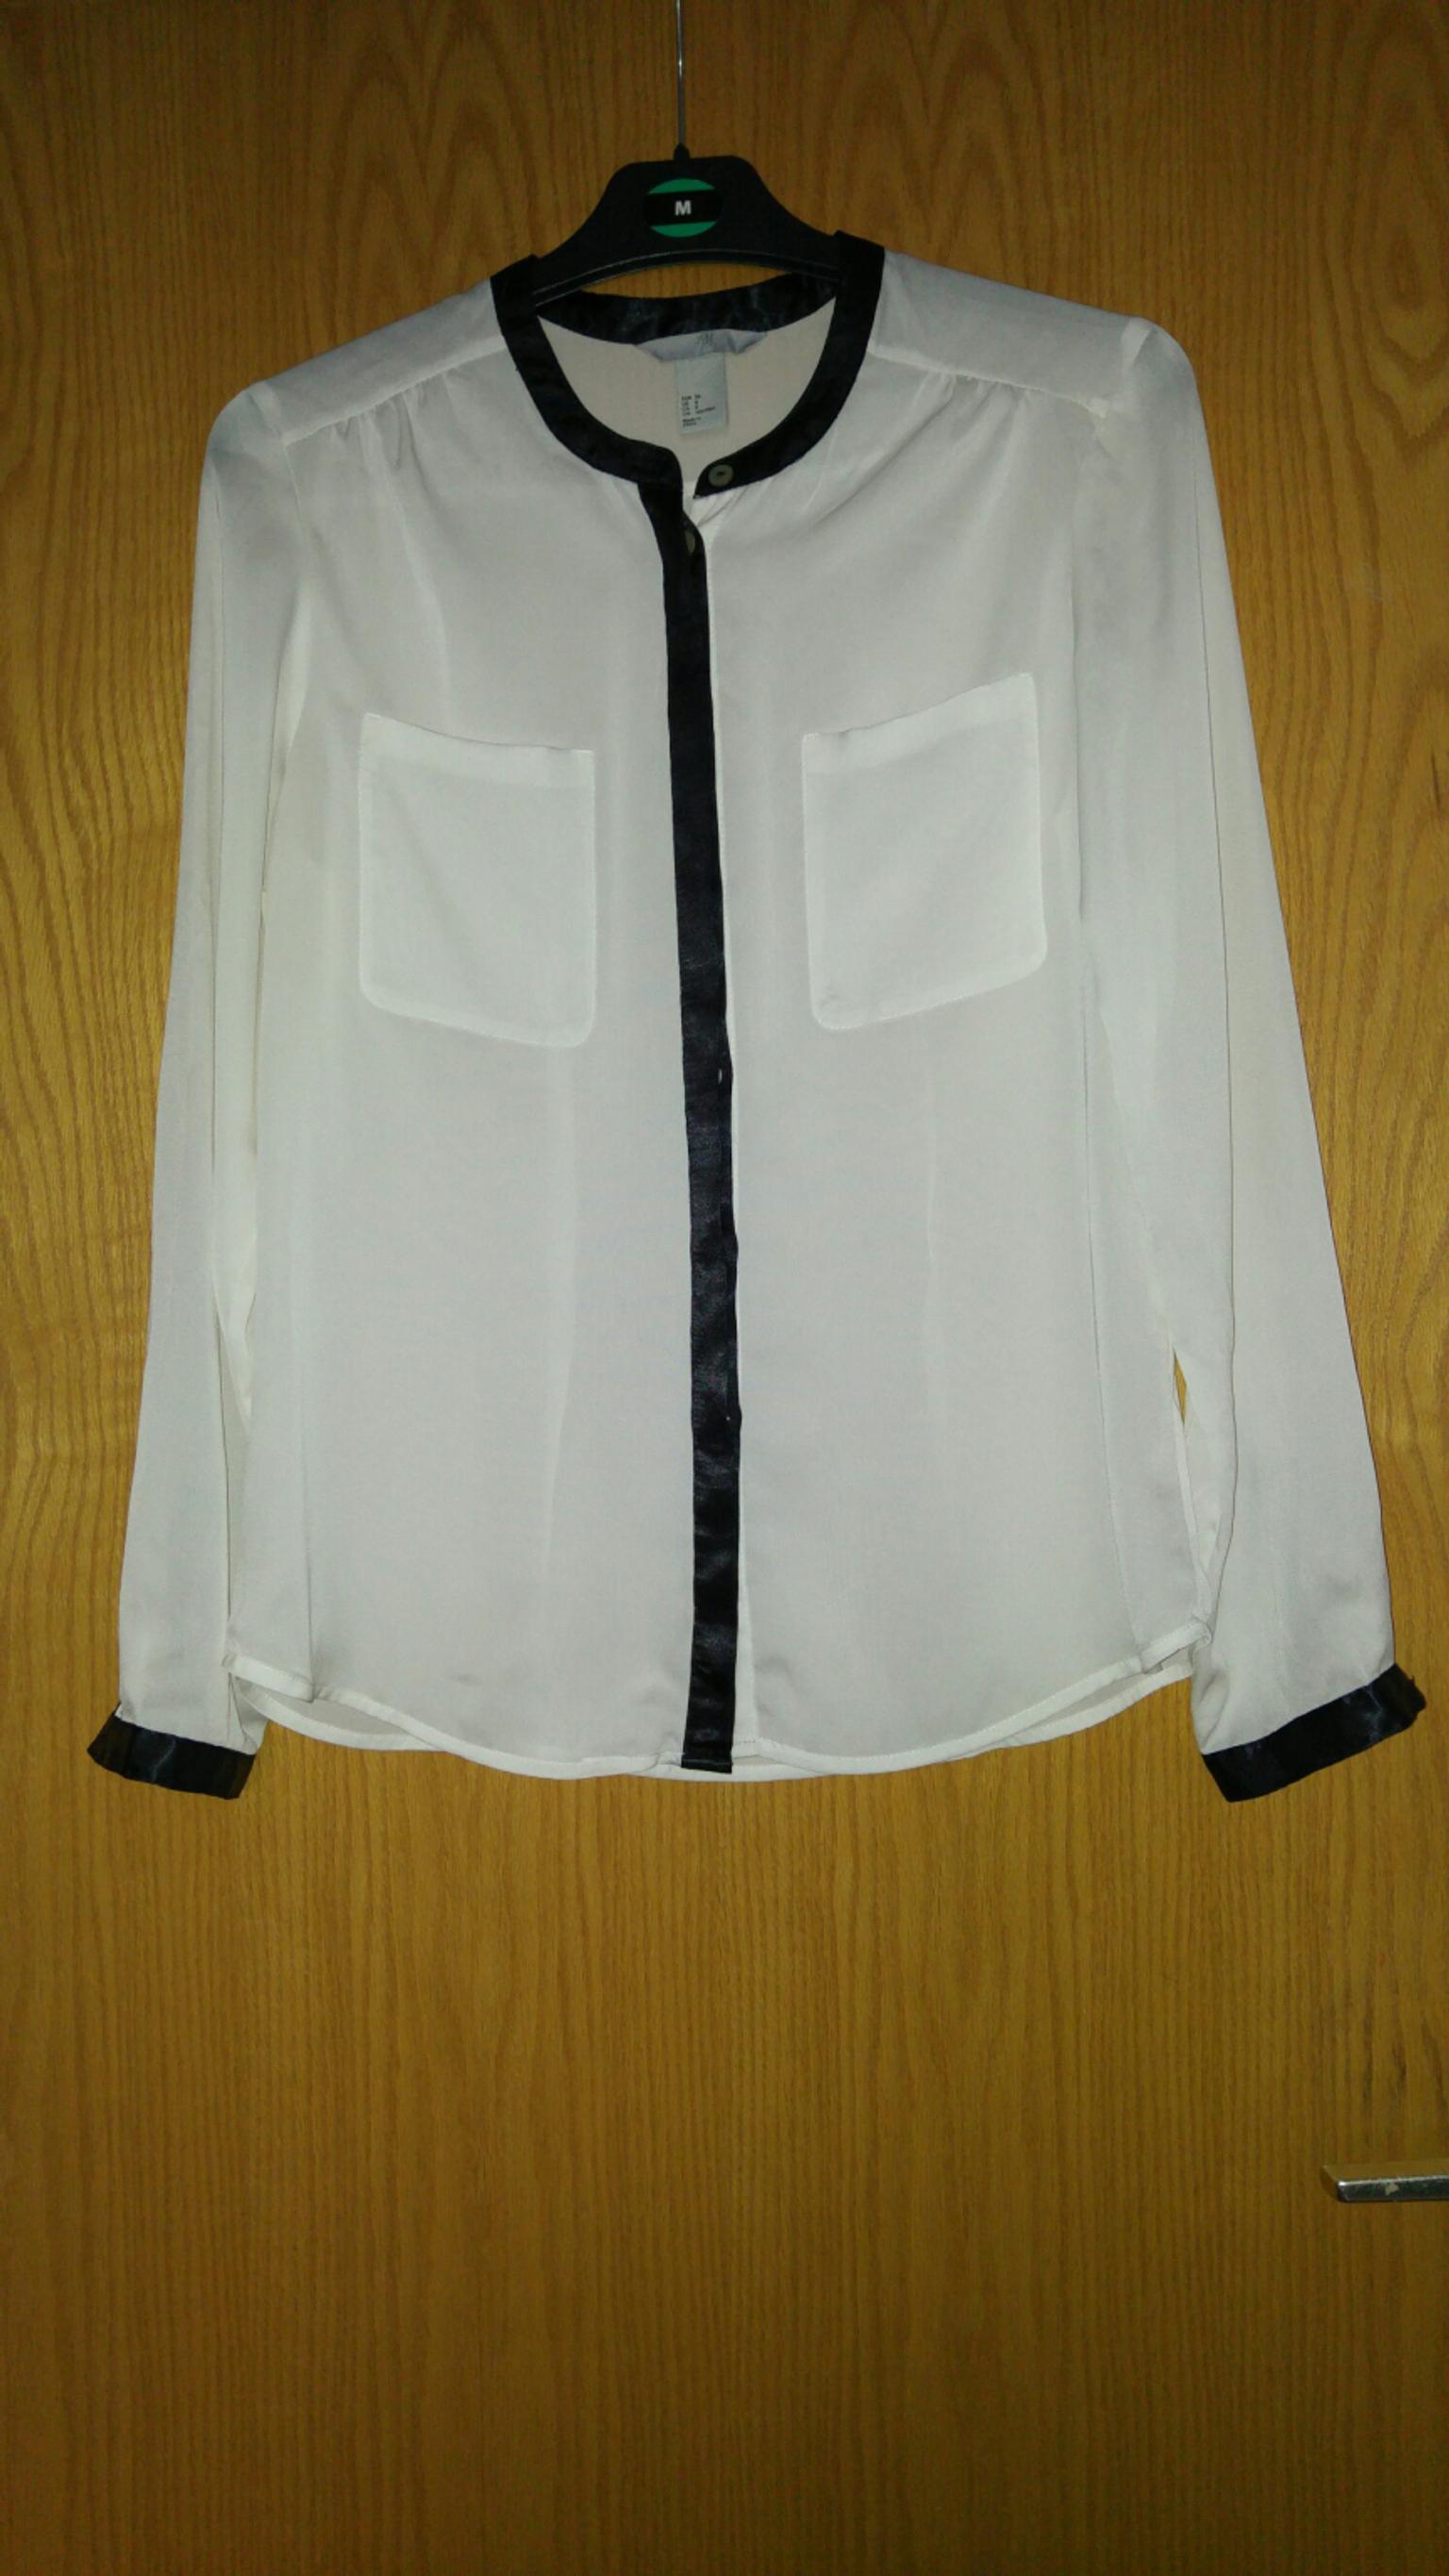 Bluse Von H M In Hannover For 8 00 For Sale Shpock